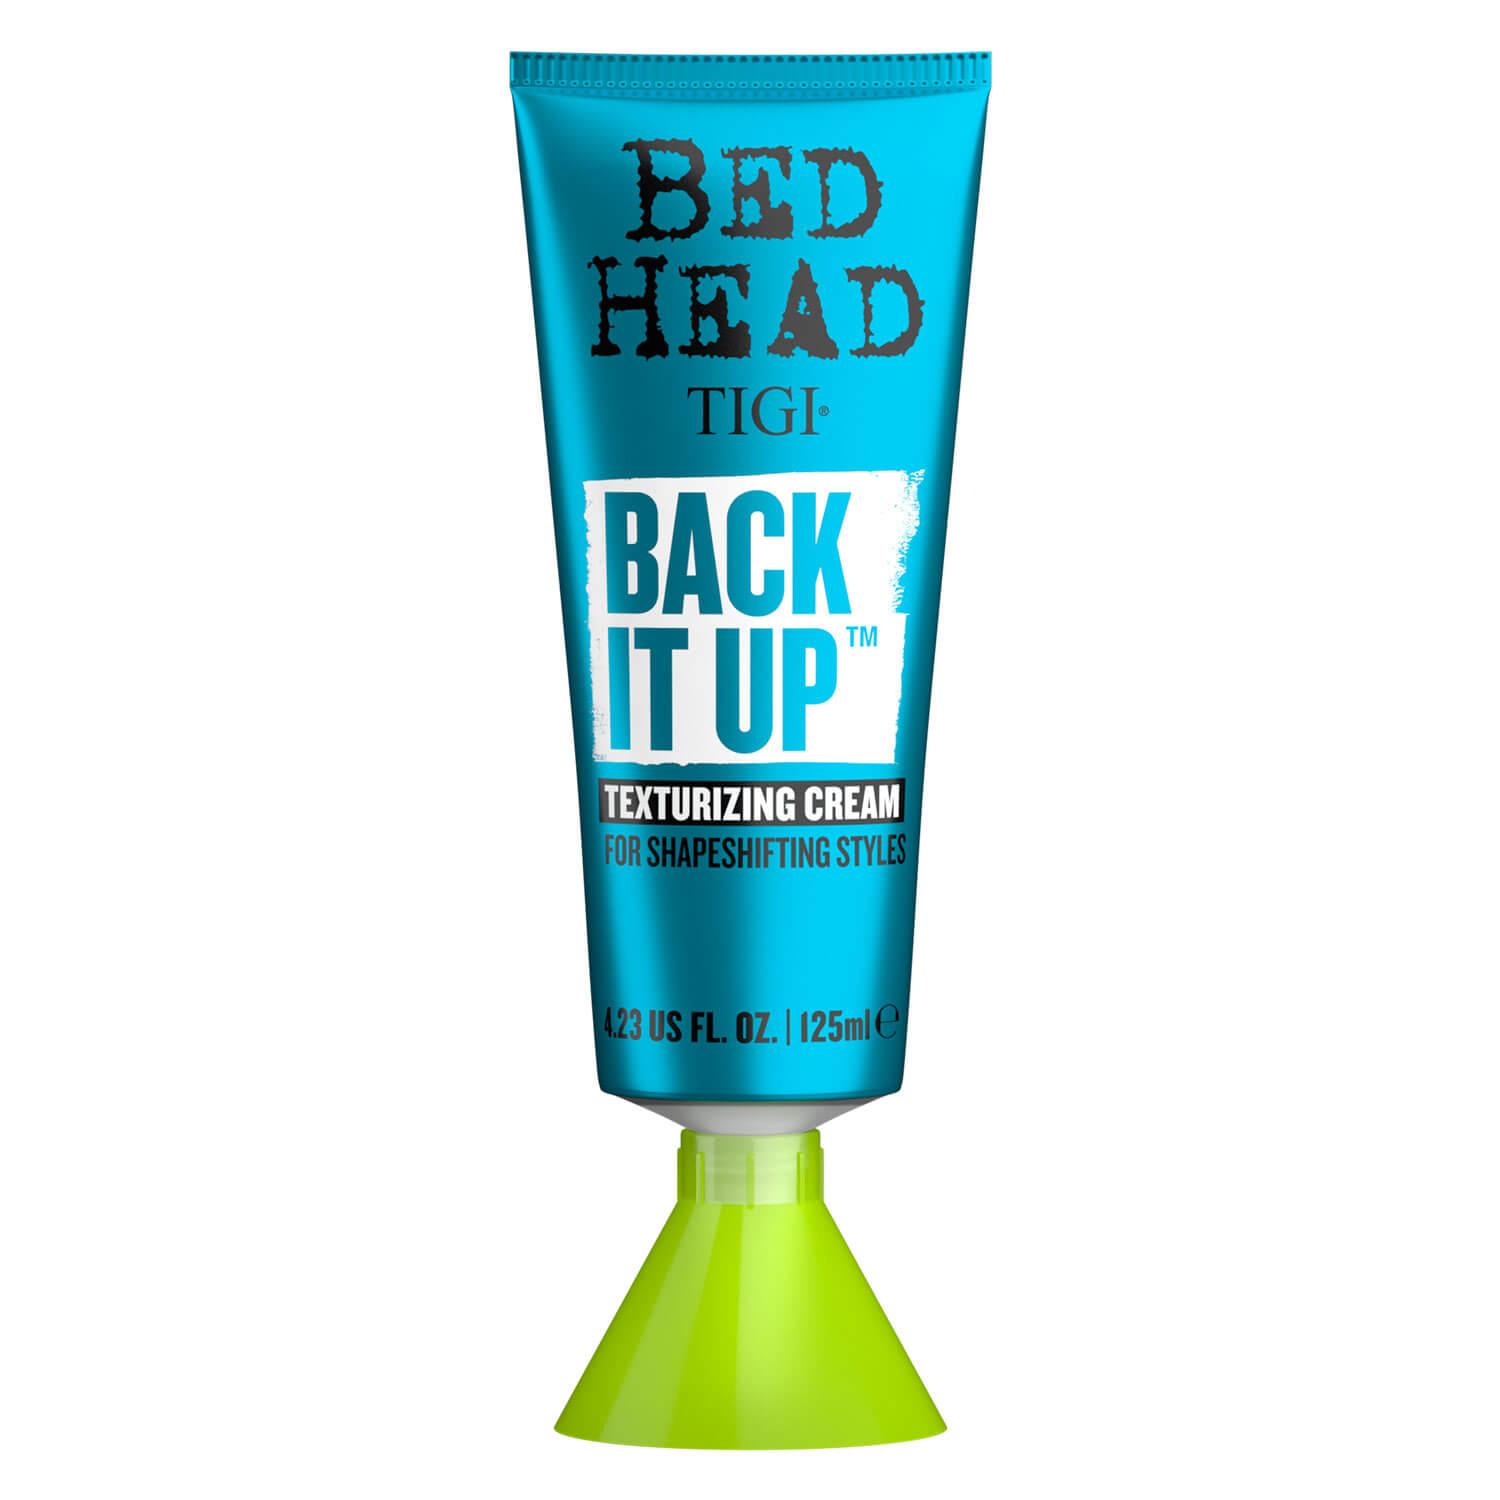 Bed Head - Back it Up Texturizing Cream